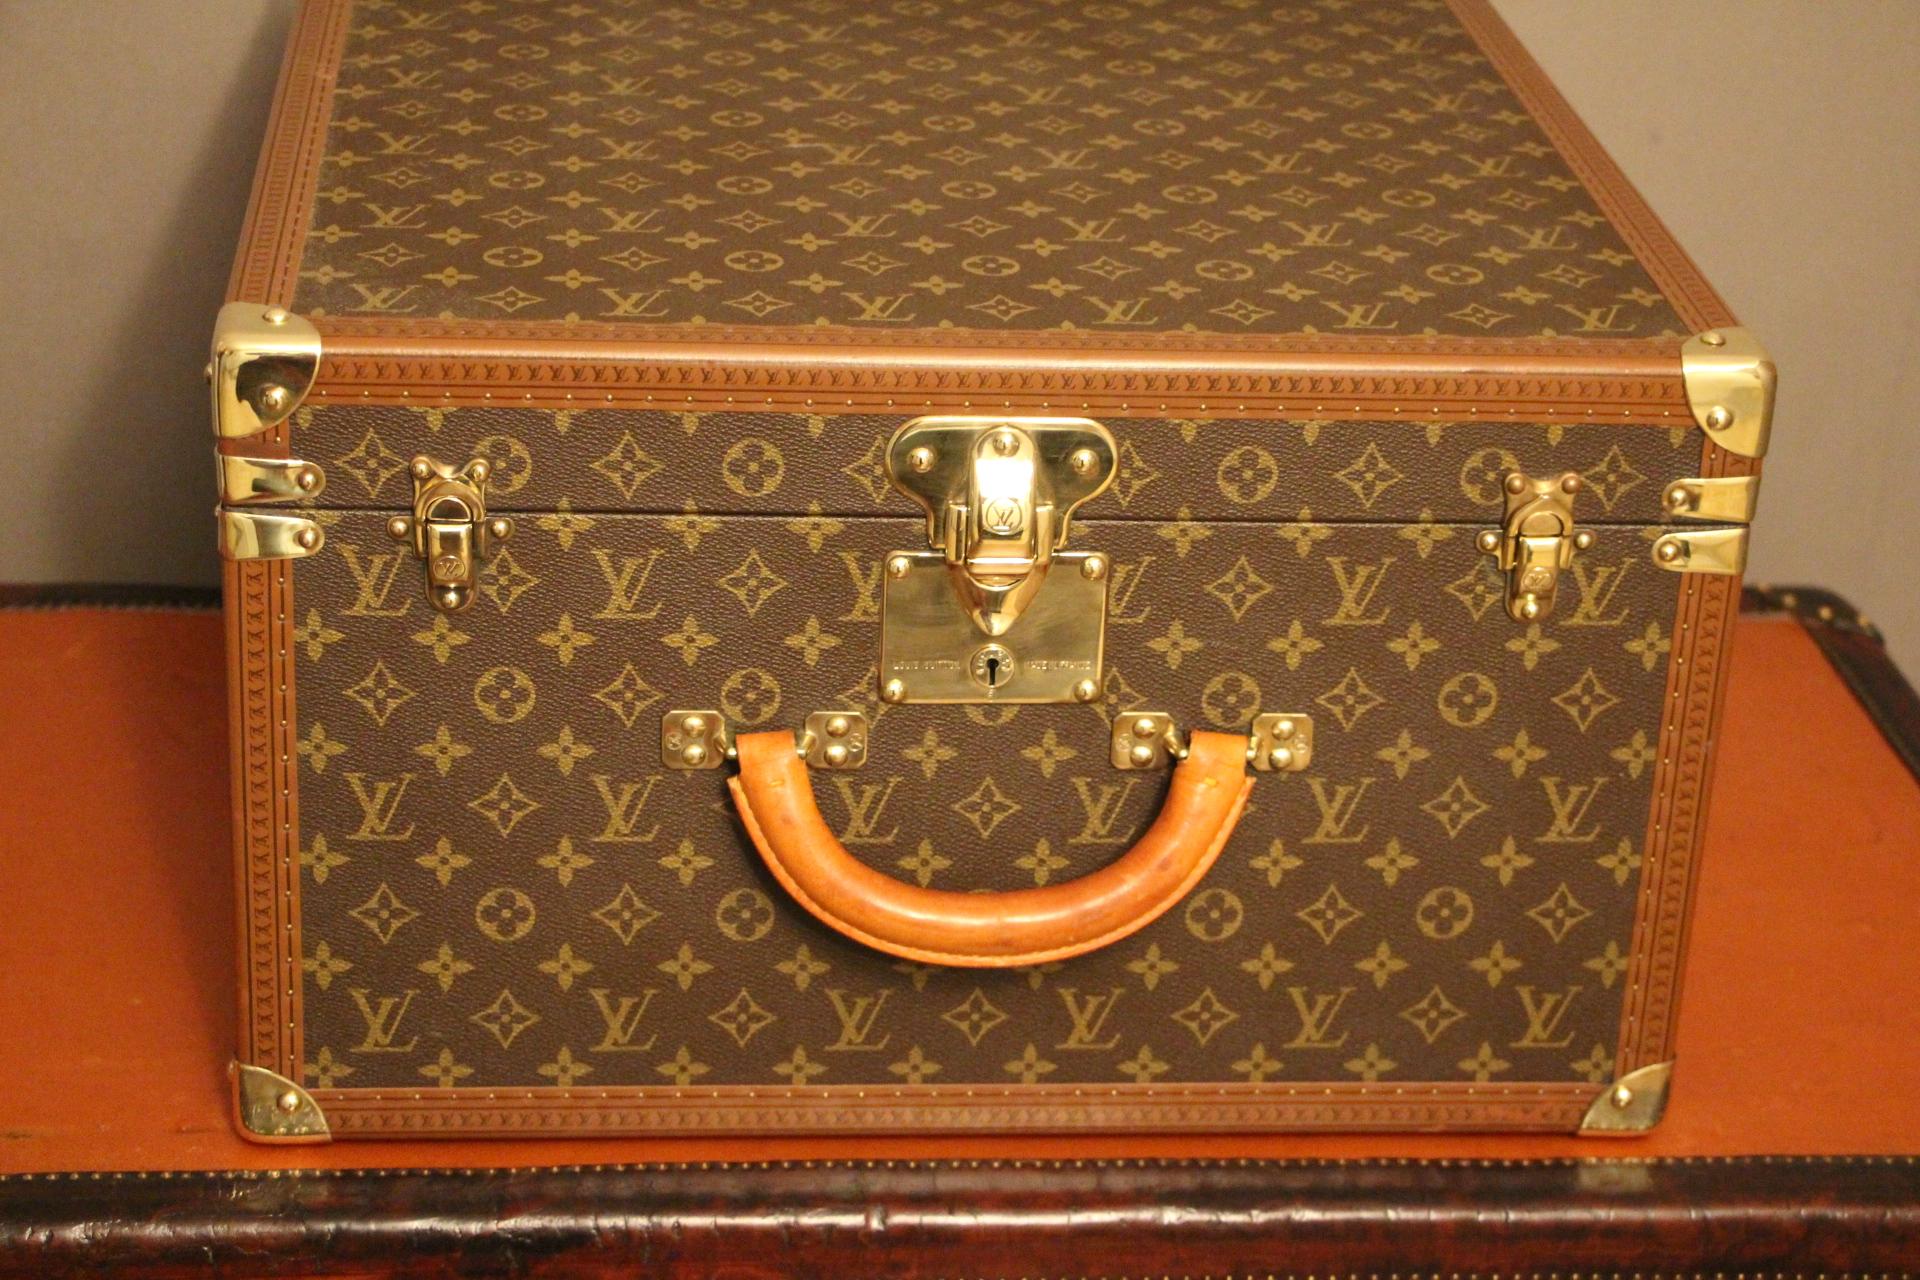 This beautiful Louis Vuitton hat box features monogram canvas, brass fittings and leather handle.
Interior is in perfect condition with its Louis Vuitton label and serial number. No removable tray.
It could be used as a small coffee table or side